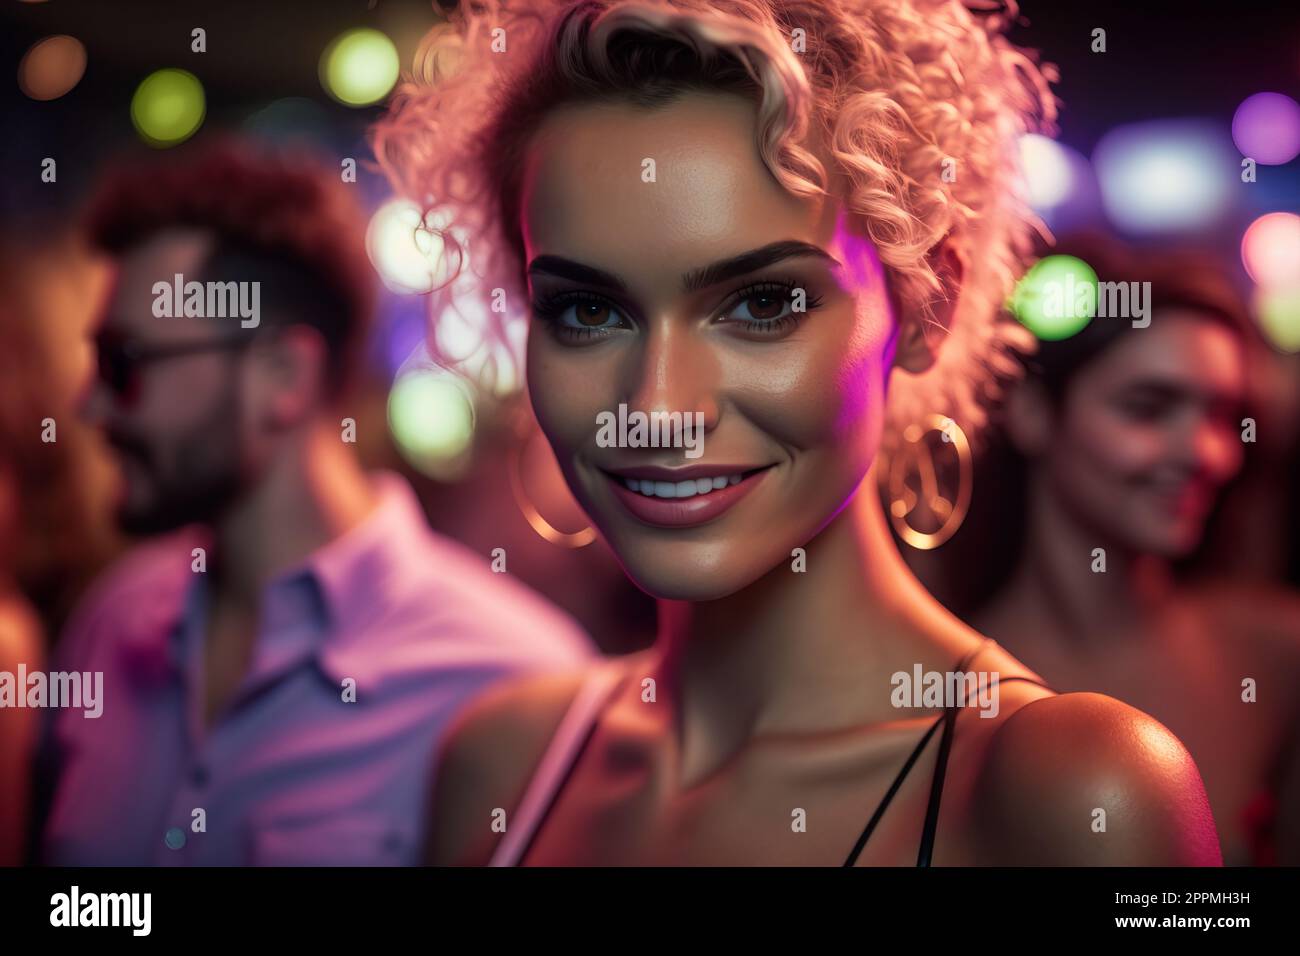 Party girl socializing on a night out. Happy woman smiling, chatting and having fun with friends outdoor at the restaurant or bar Stock Photo